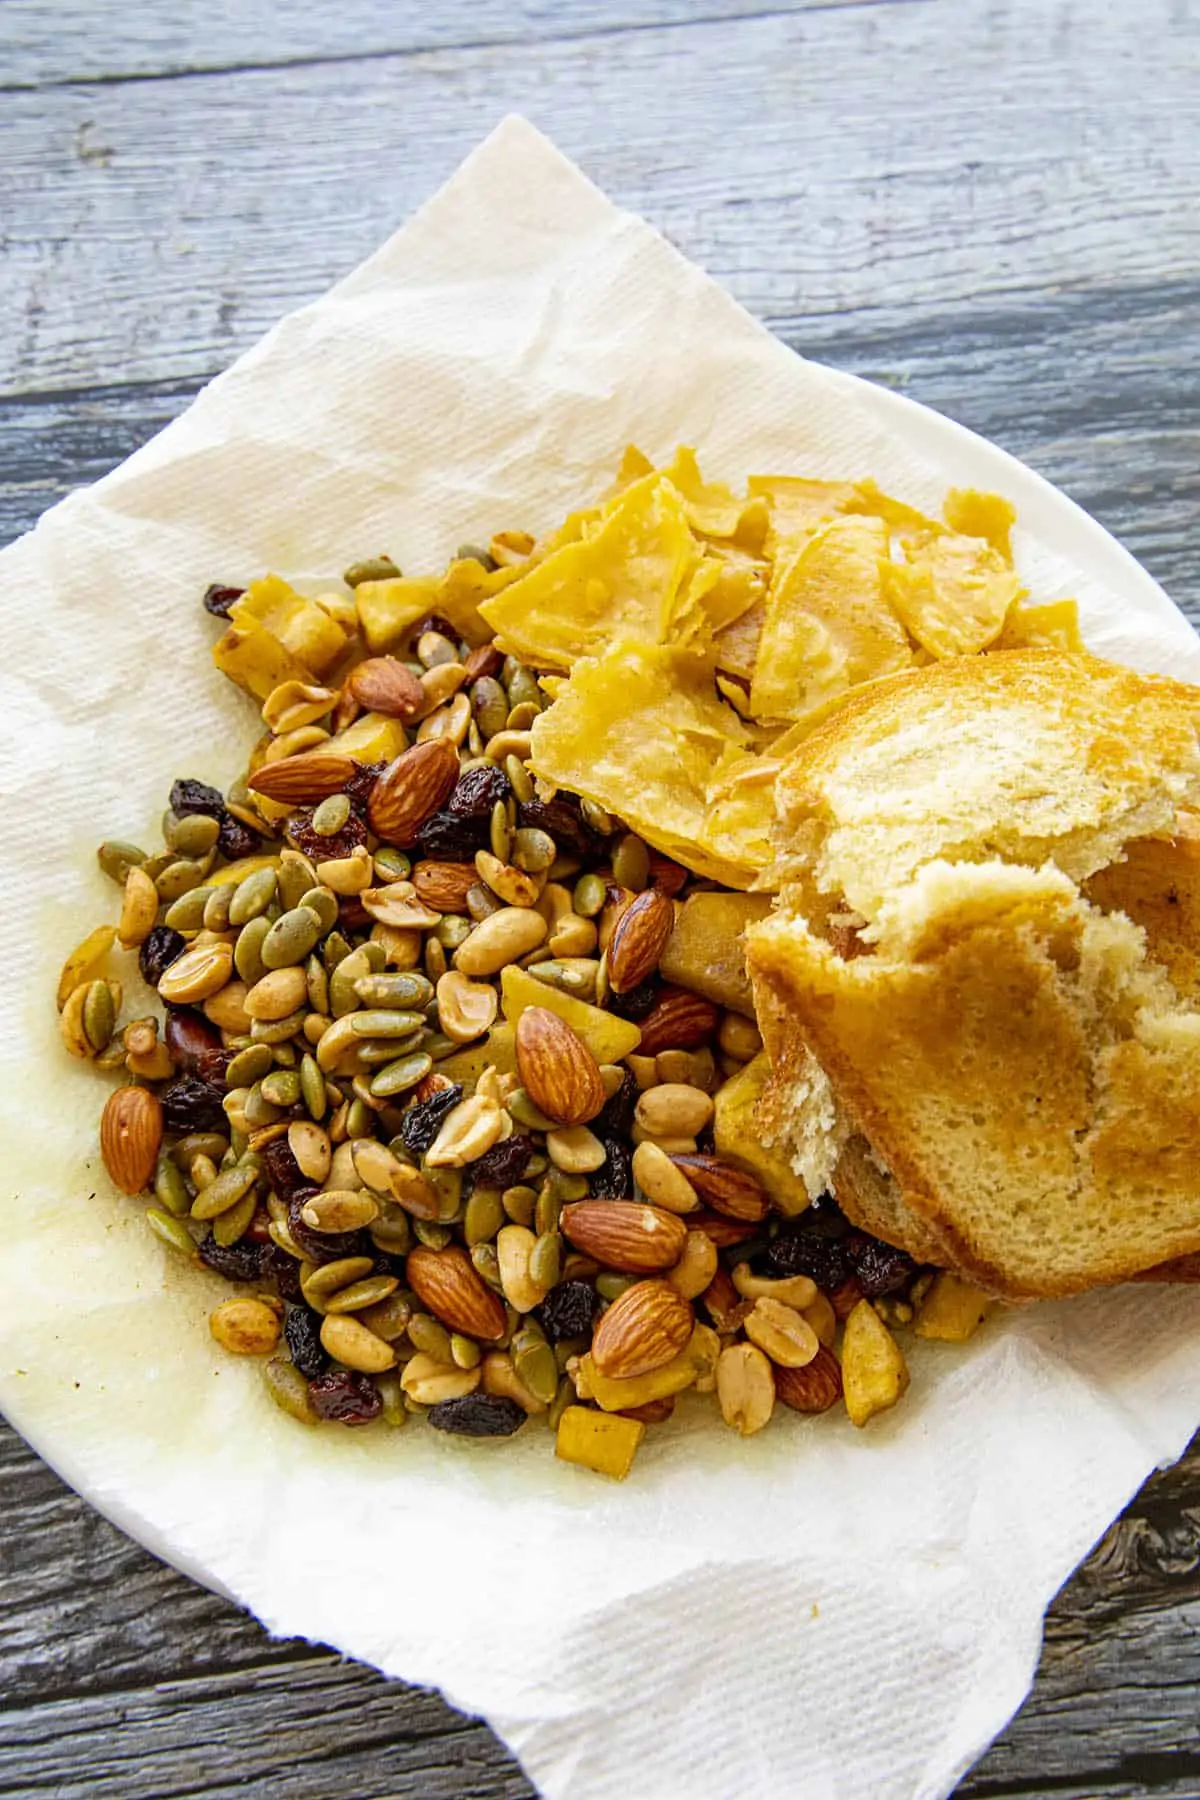 Fried nuts, bread and tortillas for making mole poblano